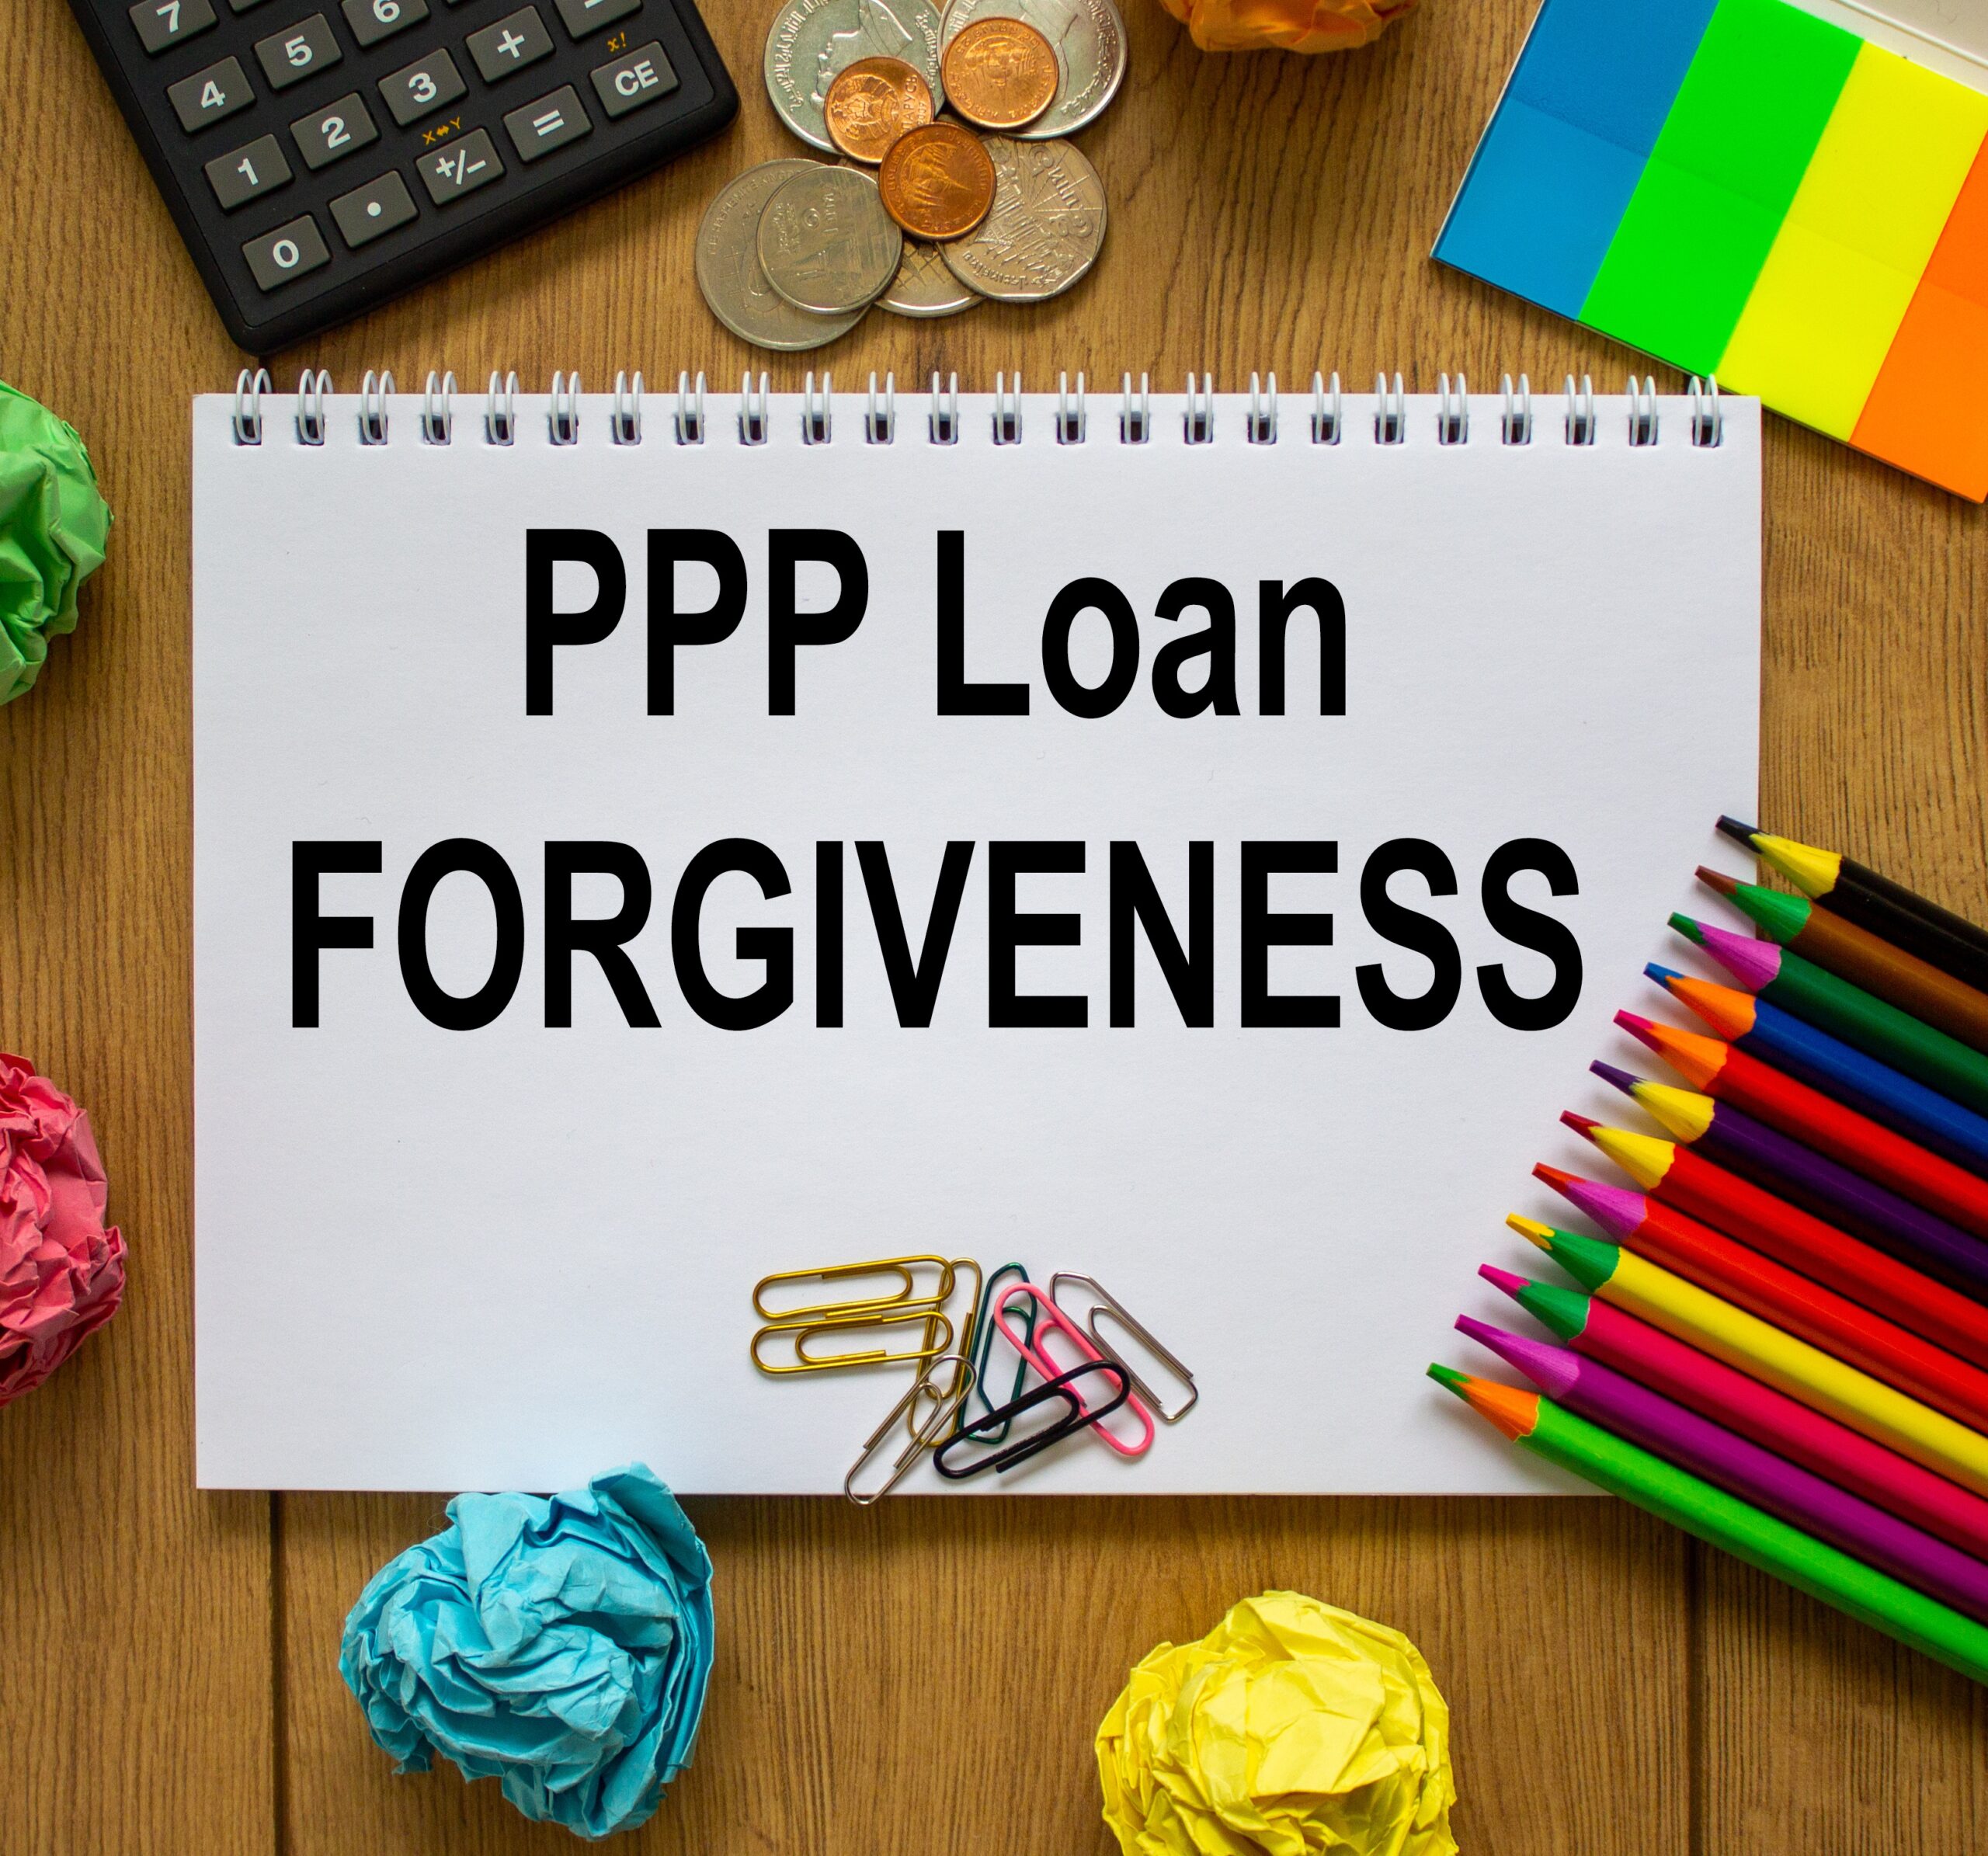 Applying for PPP loan forgiveness-Can I do it myself?